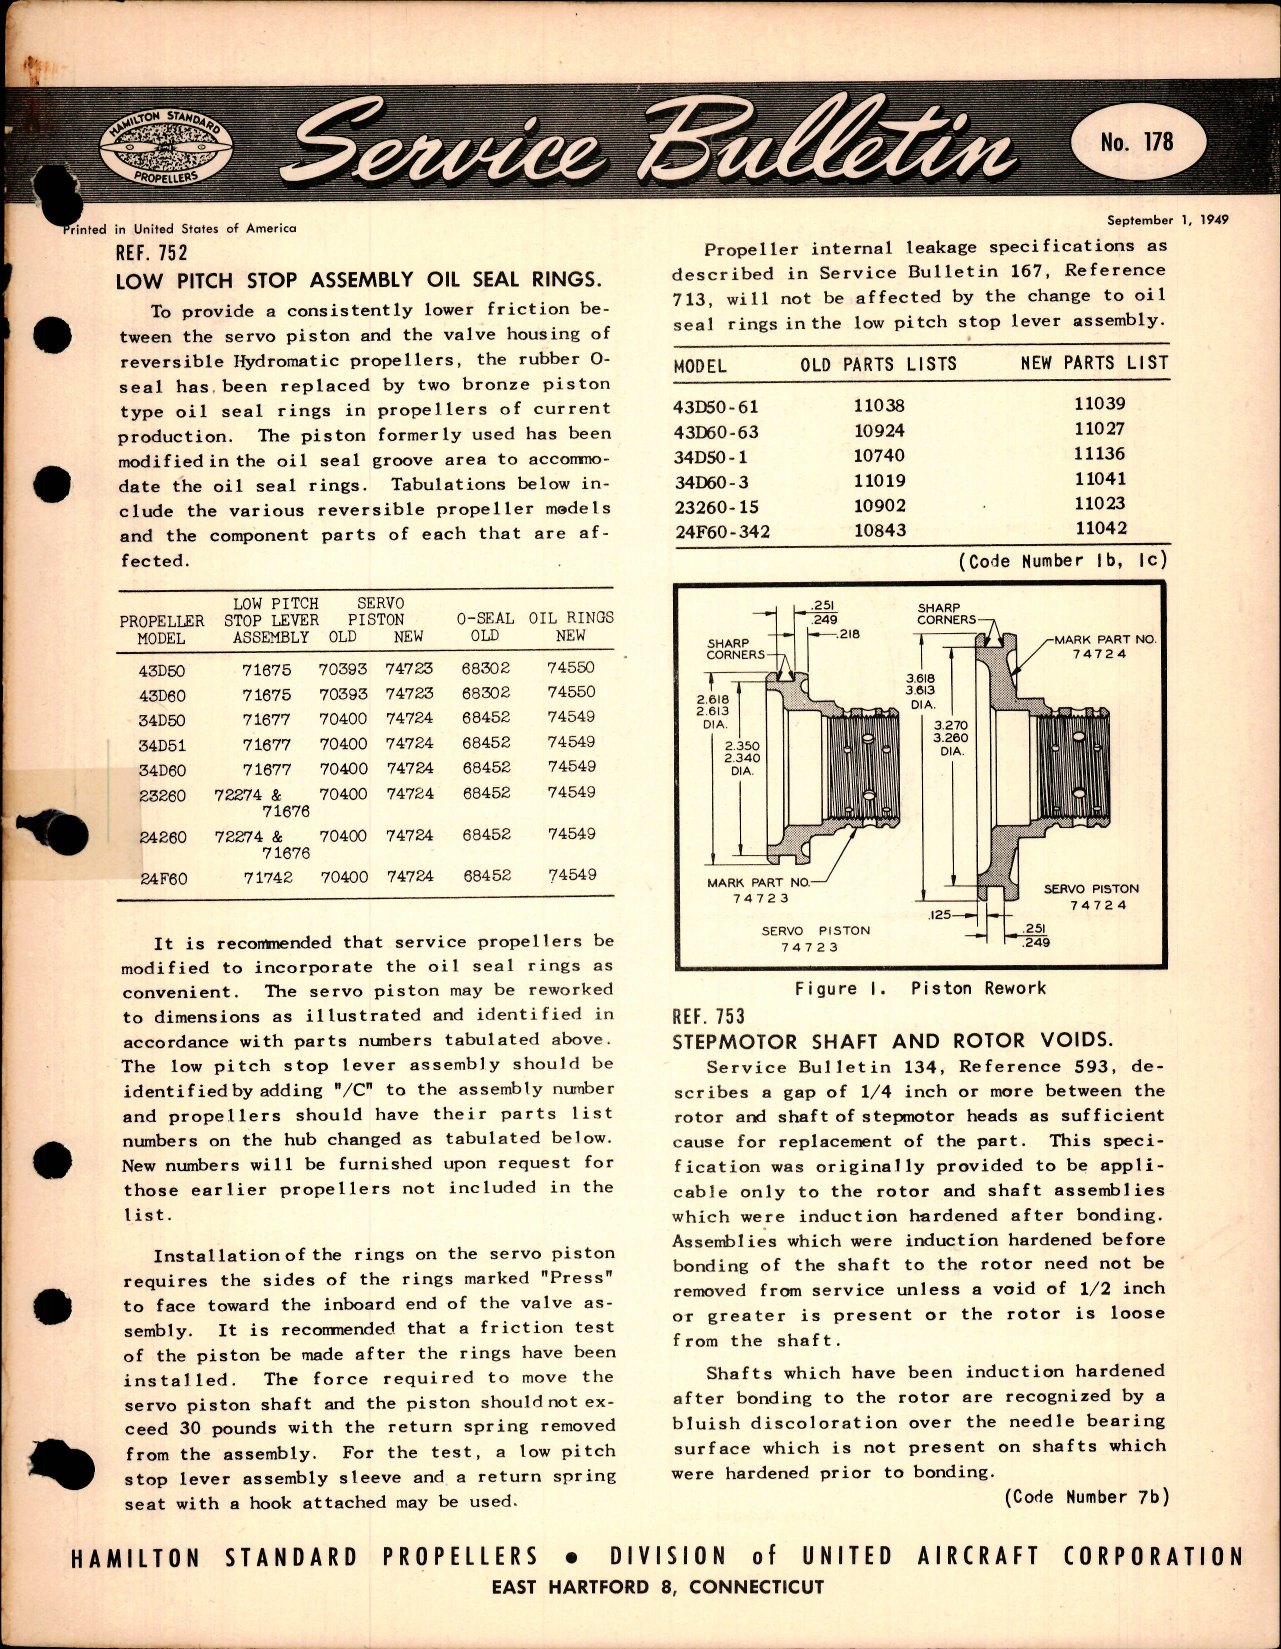 Sample page 1 from AirCorps Library document: Low Pitch Stop Assembly Oil Seal Rings, Ref 752